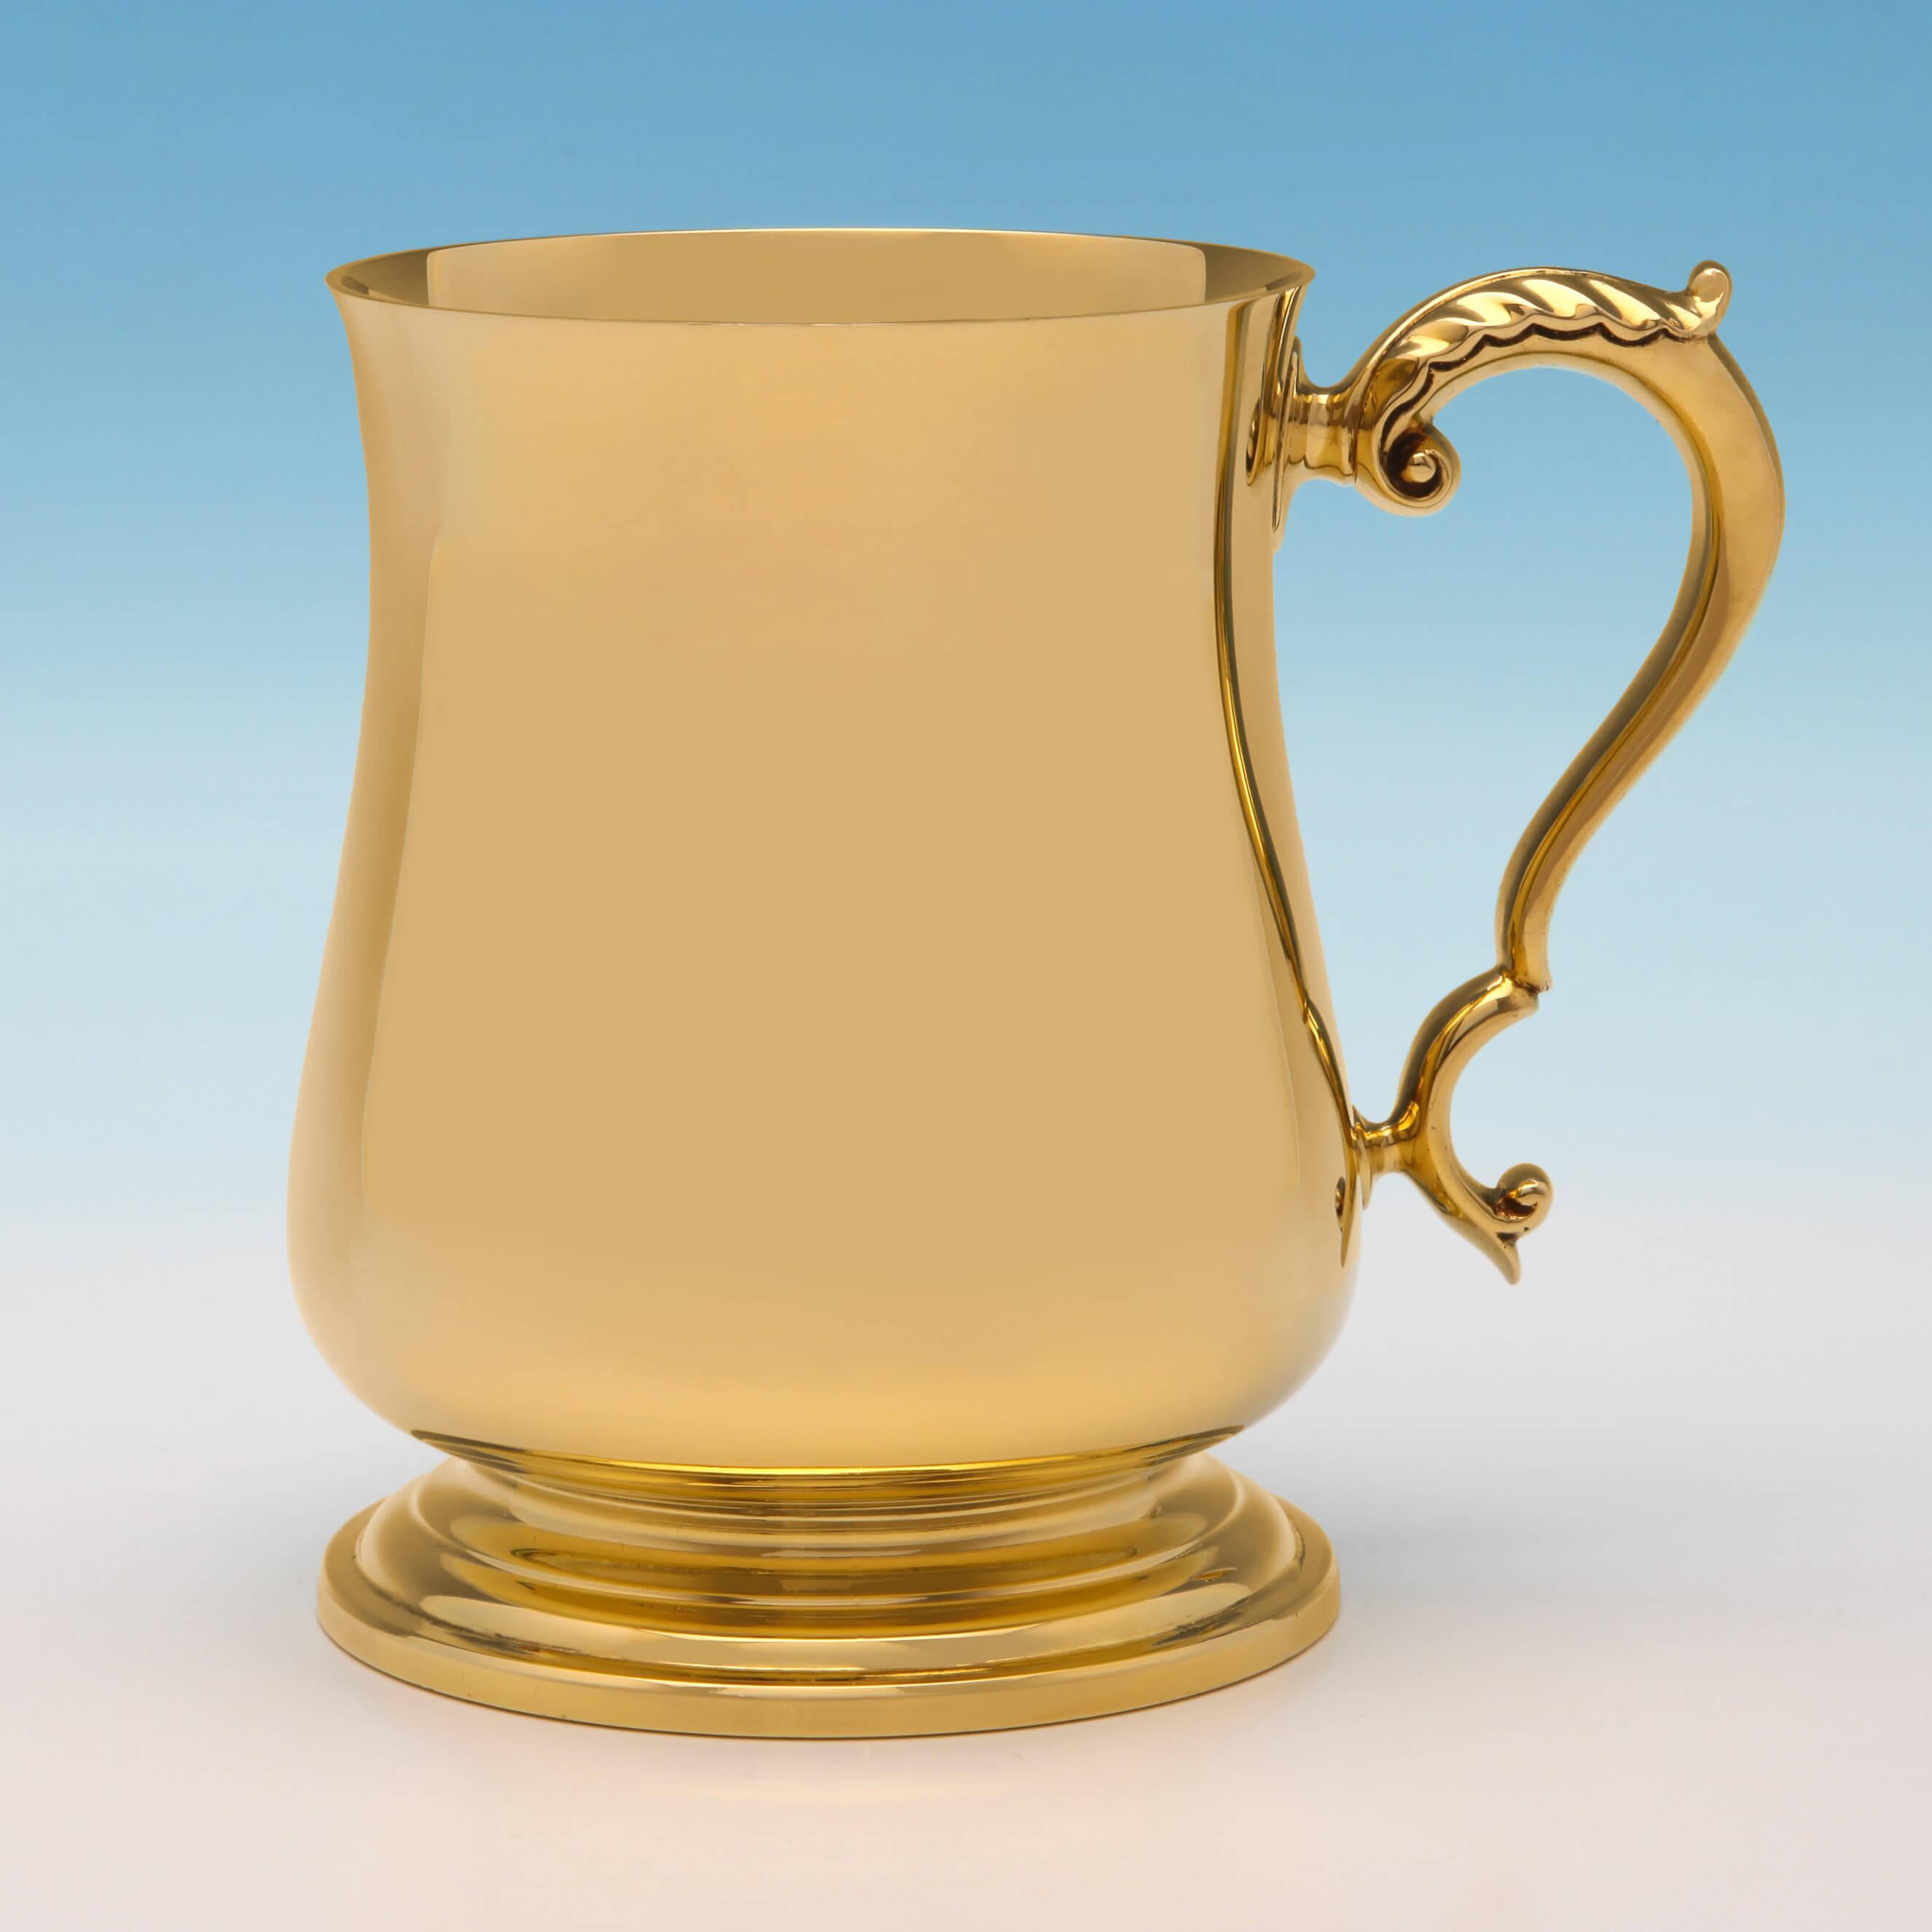 Made in Birmingham in 1968 by Prestons Ltd., this incredibly rare 18-carat gold pint mug is a true statement piece for any serious beer lover. It has been beautifully crafted in the style of a George III pint mug with an acanthus scroll handle and